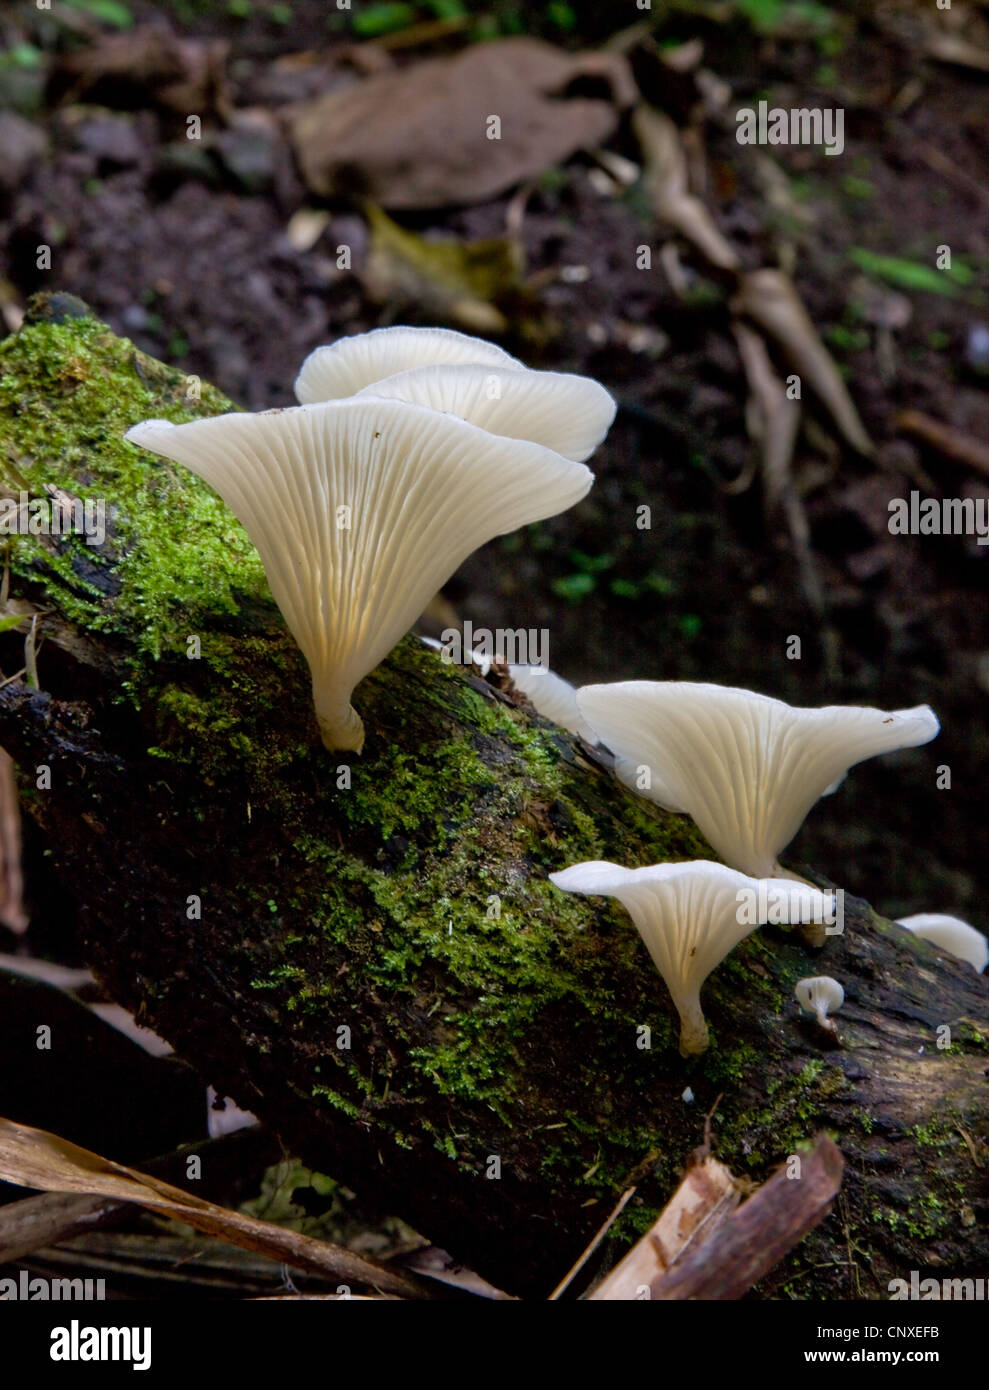 Delicate white funnel shaped fungus growing on a log in the rain forest of  Dominica Stock Photo - Alamy